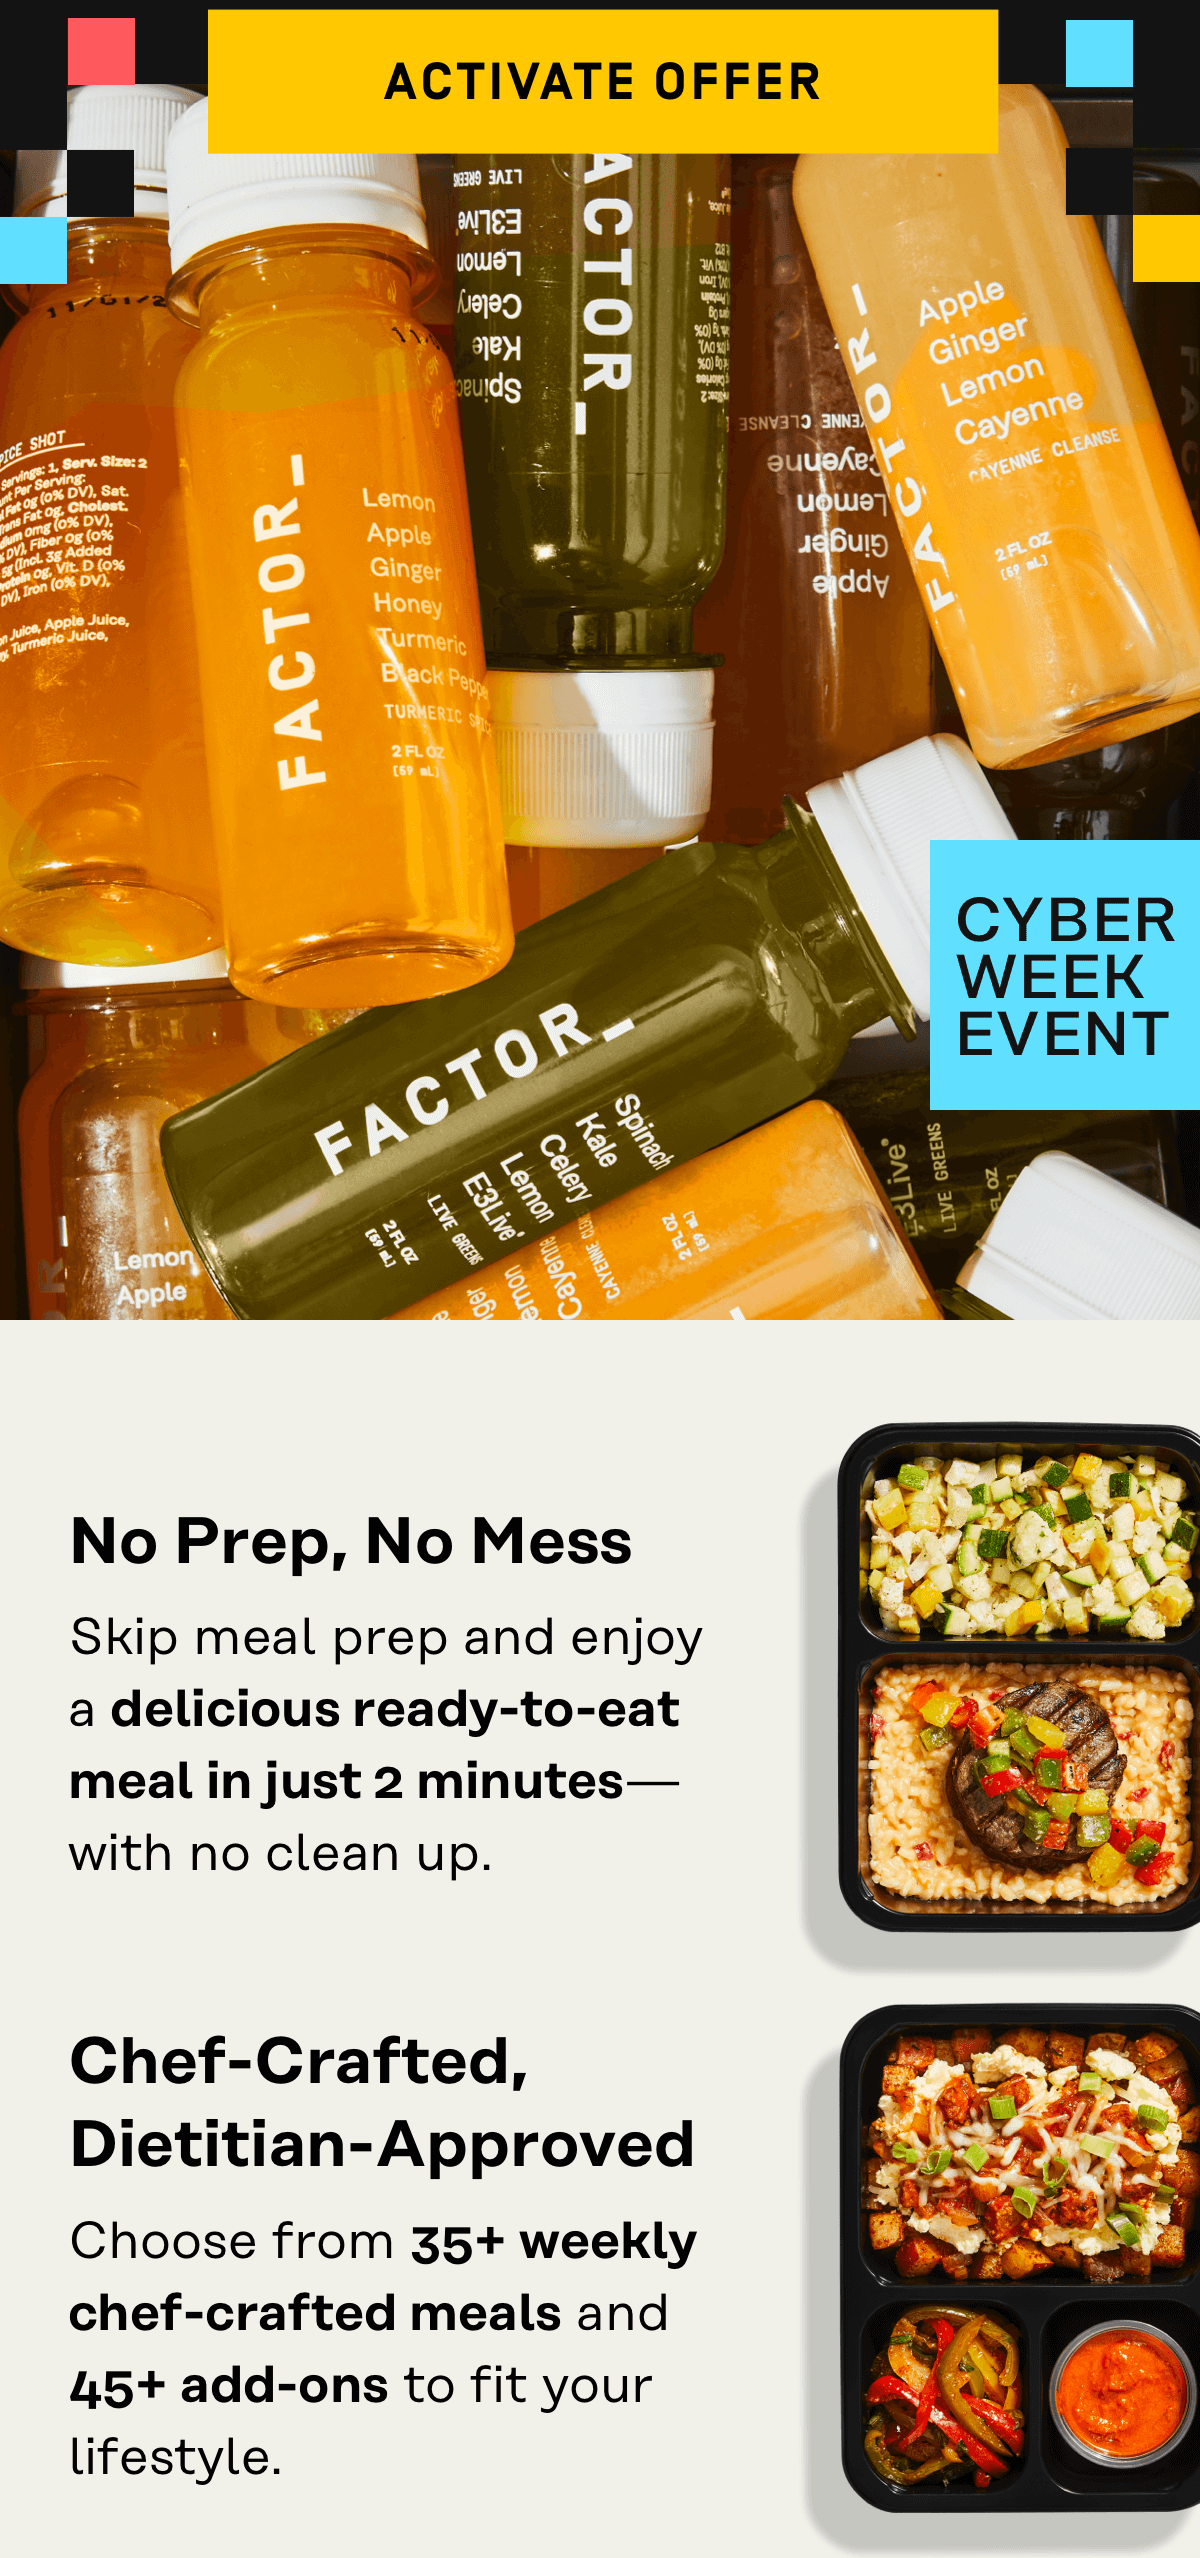 No prep, no messs - skip meal prep and enjoy a delicious ready-to-eat meal in just 2 minutes!